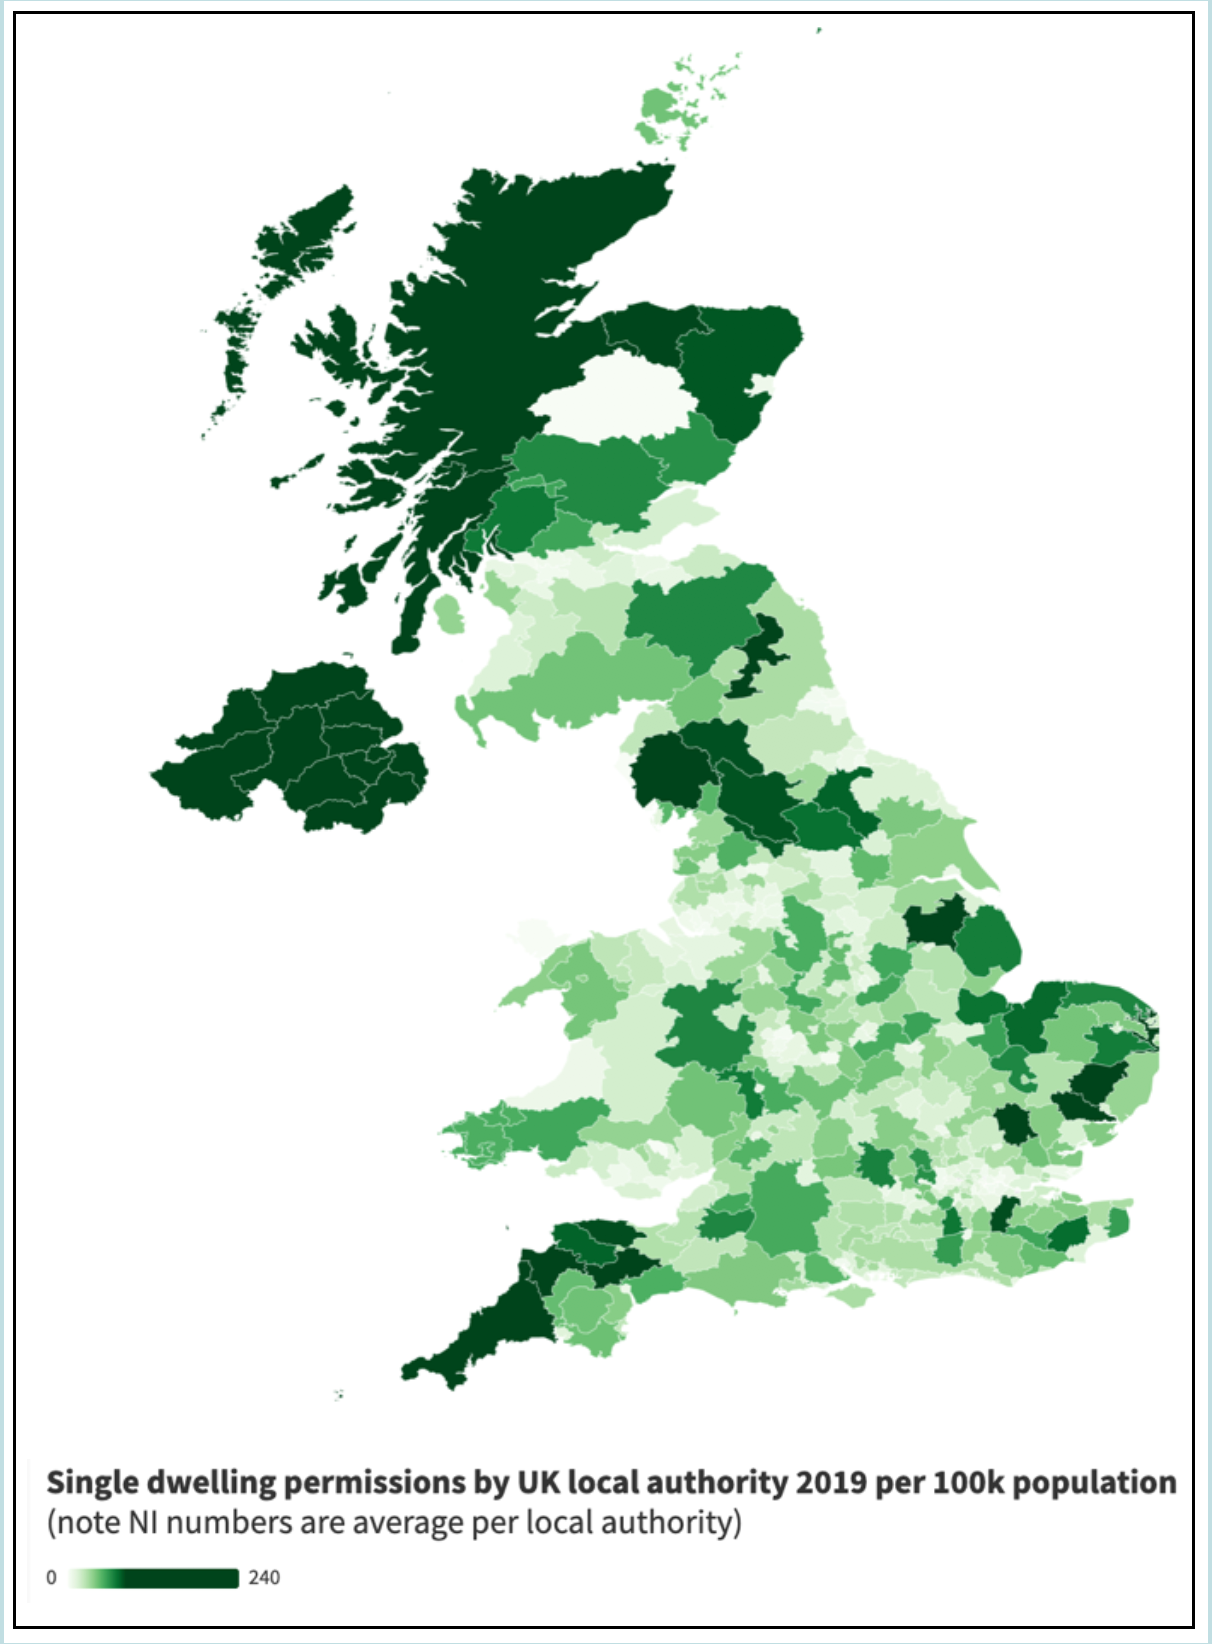 single dwellings by local authority, per 100k population